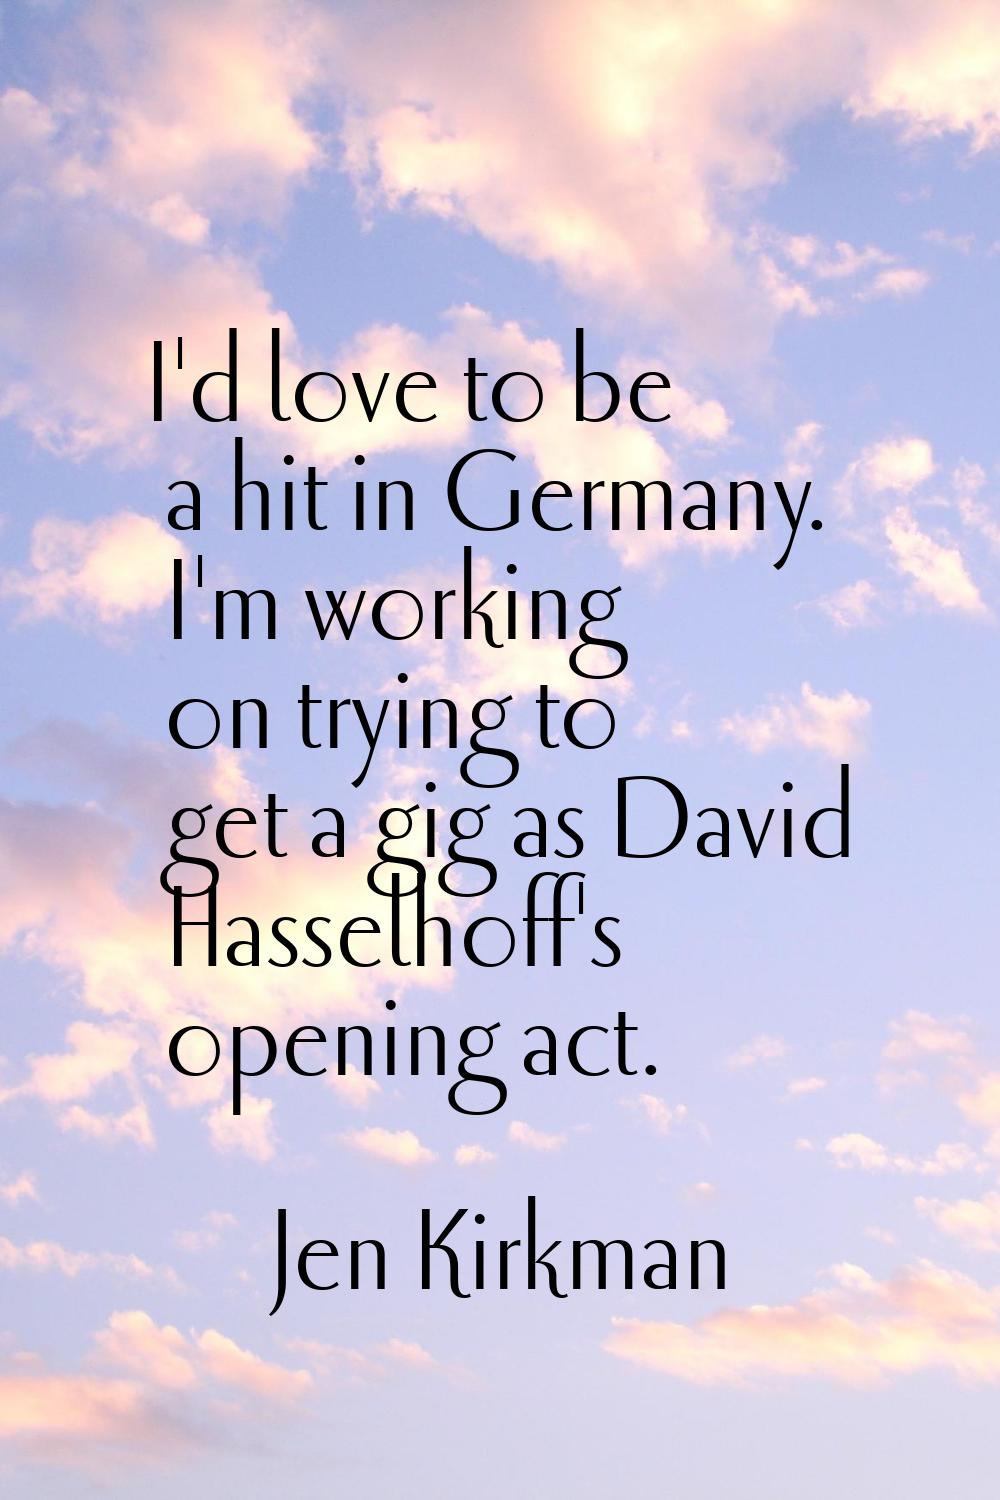 I'd love to be a hit in Germany. I'm working on trying to get a gig as David Hasselhoff's opening a